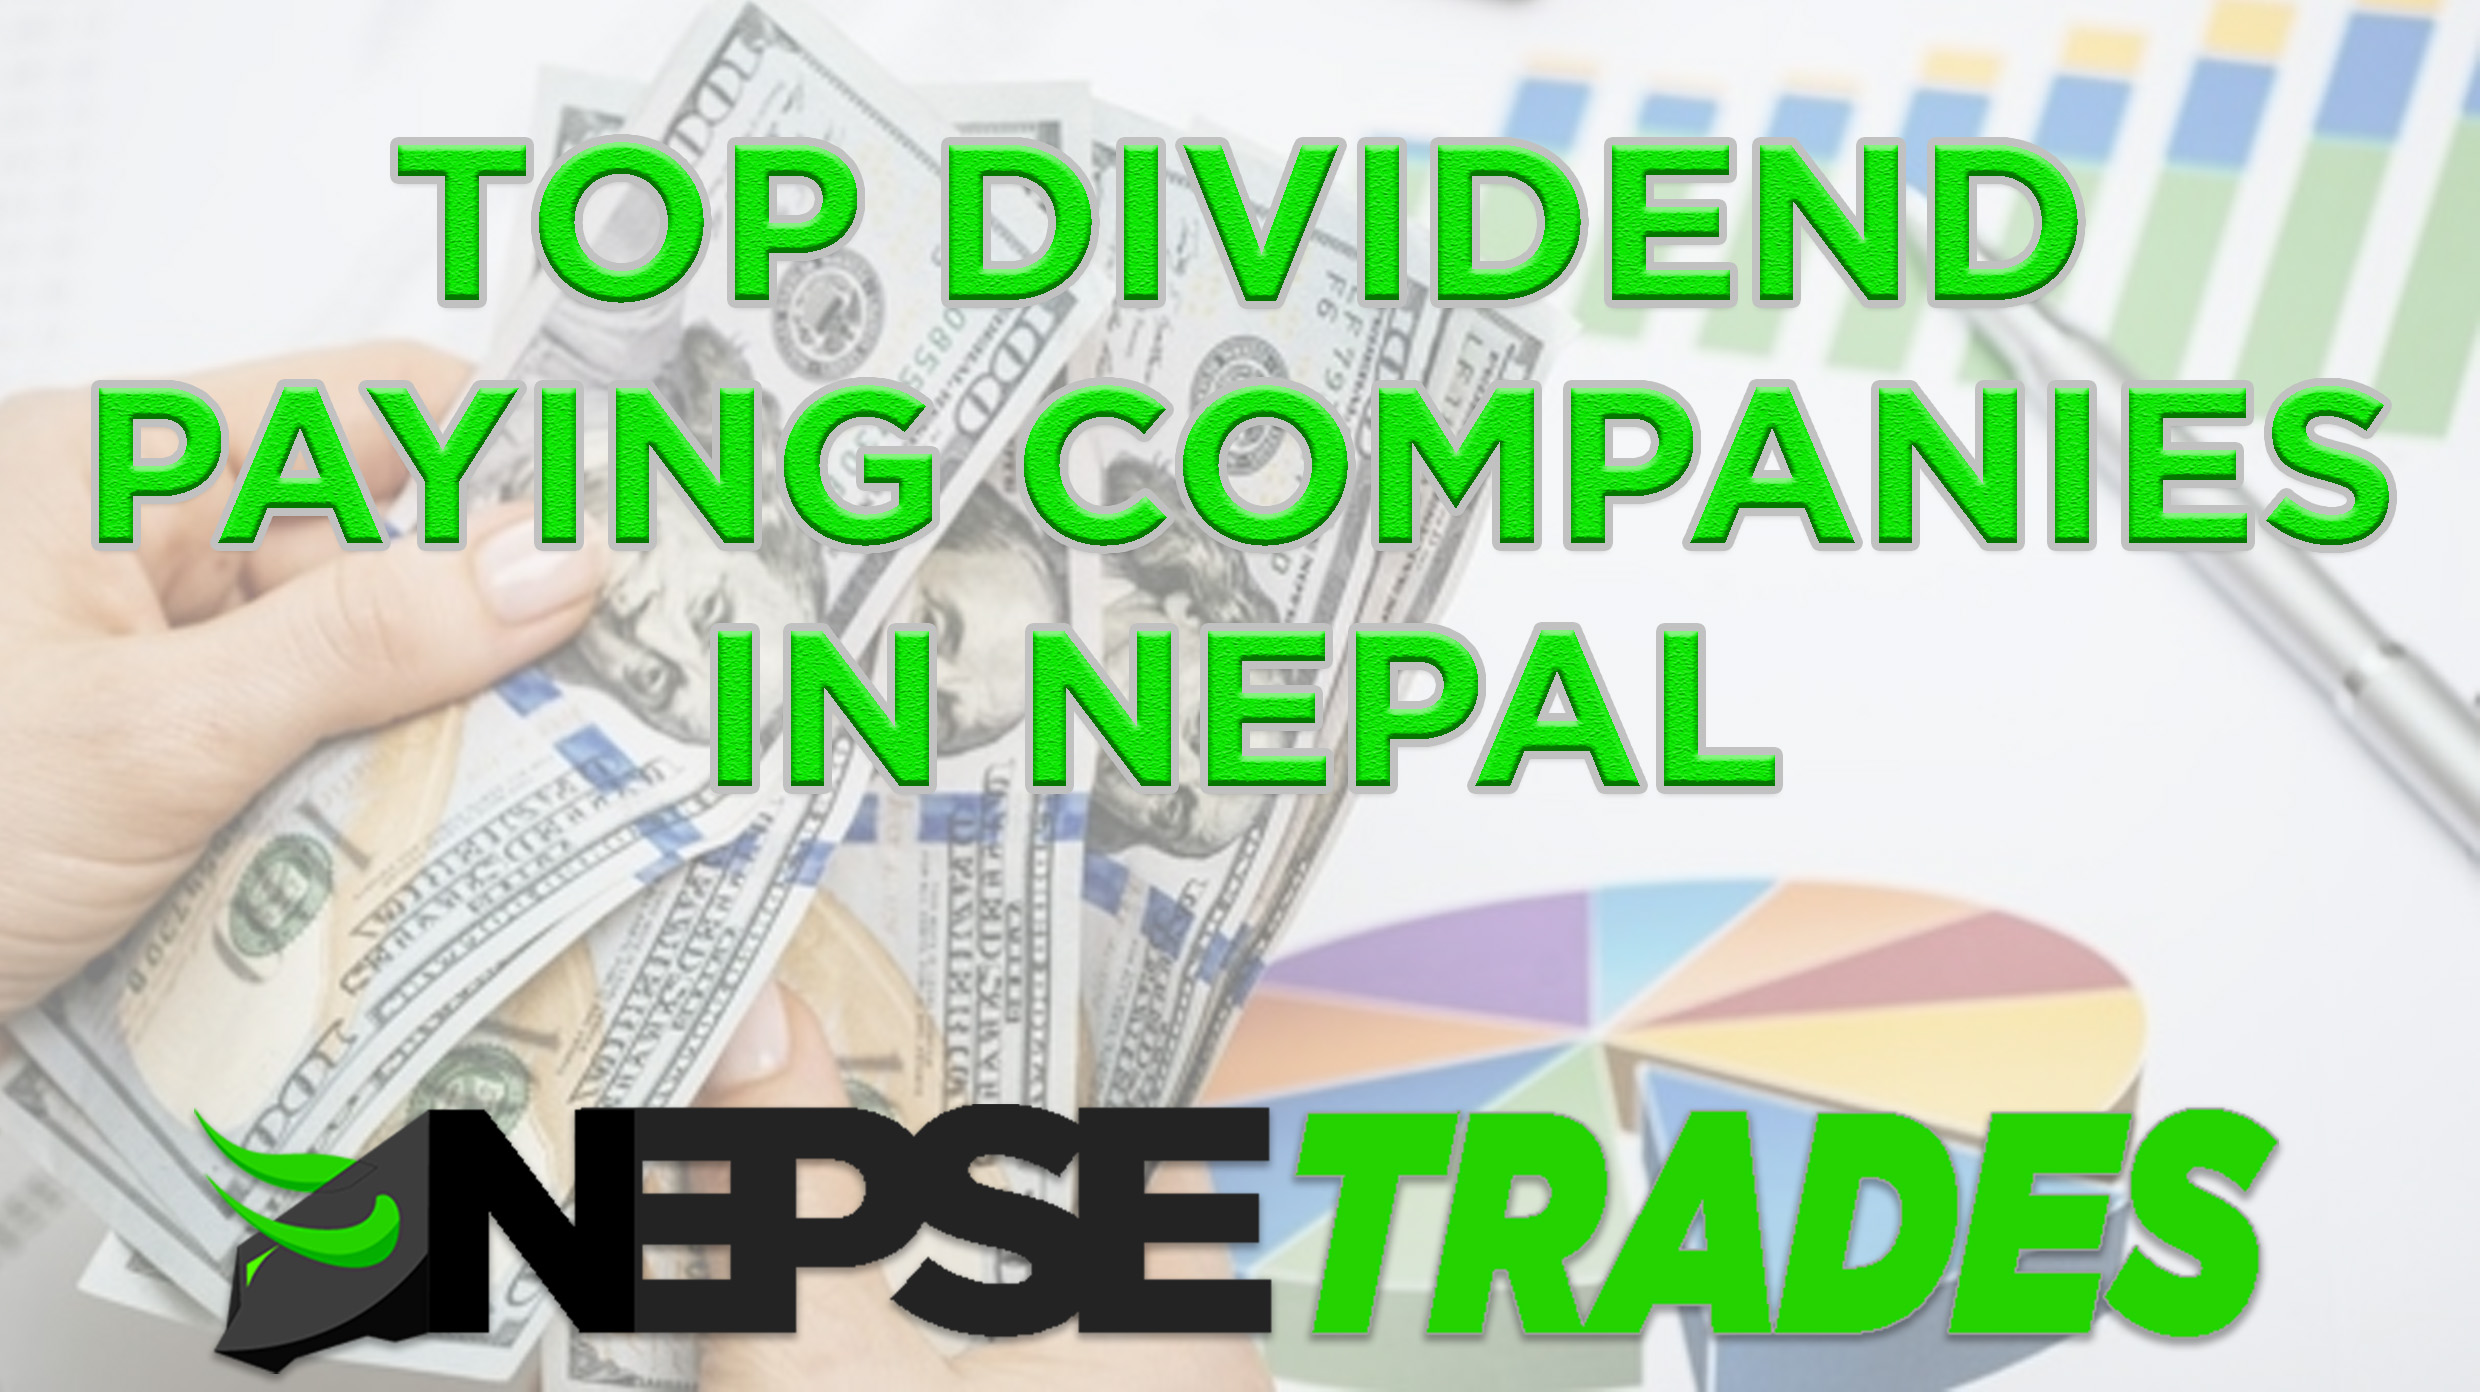 Top Dividend Paying Companies